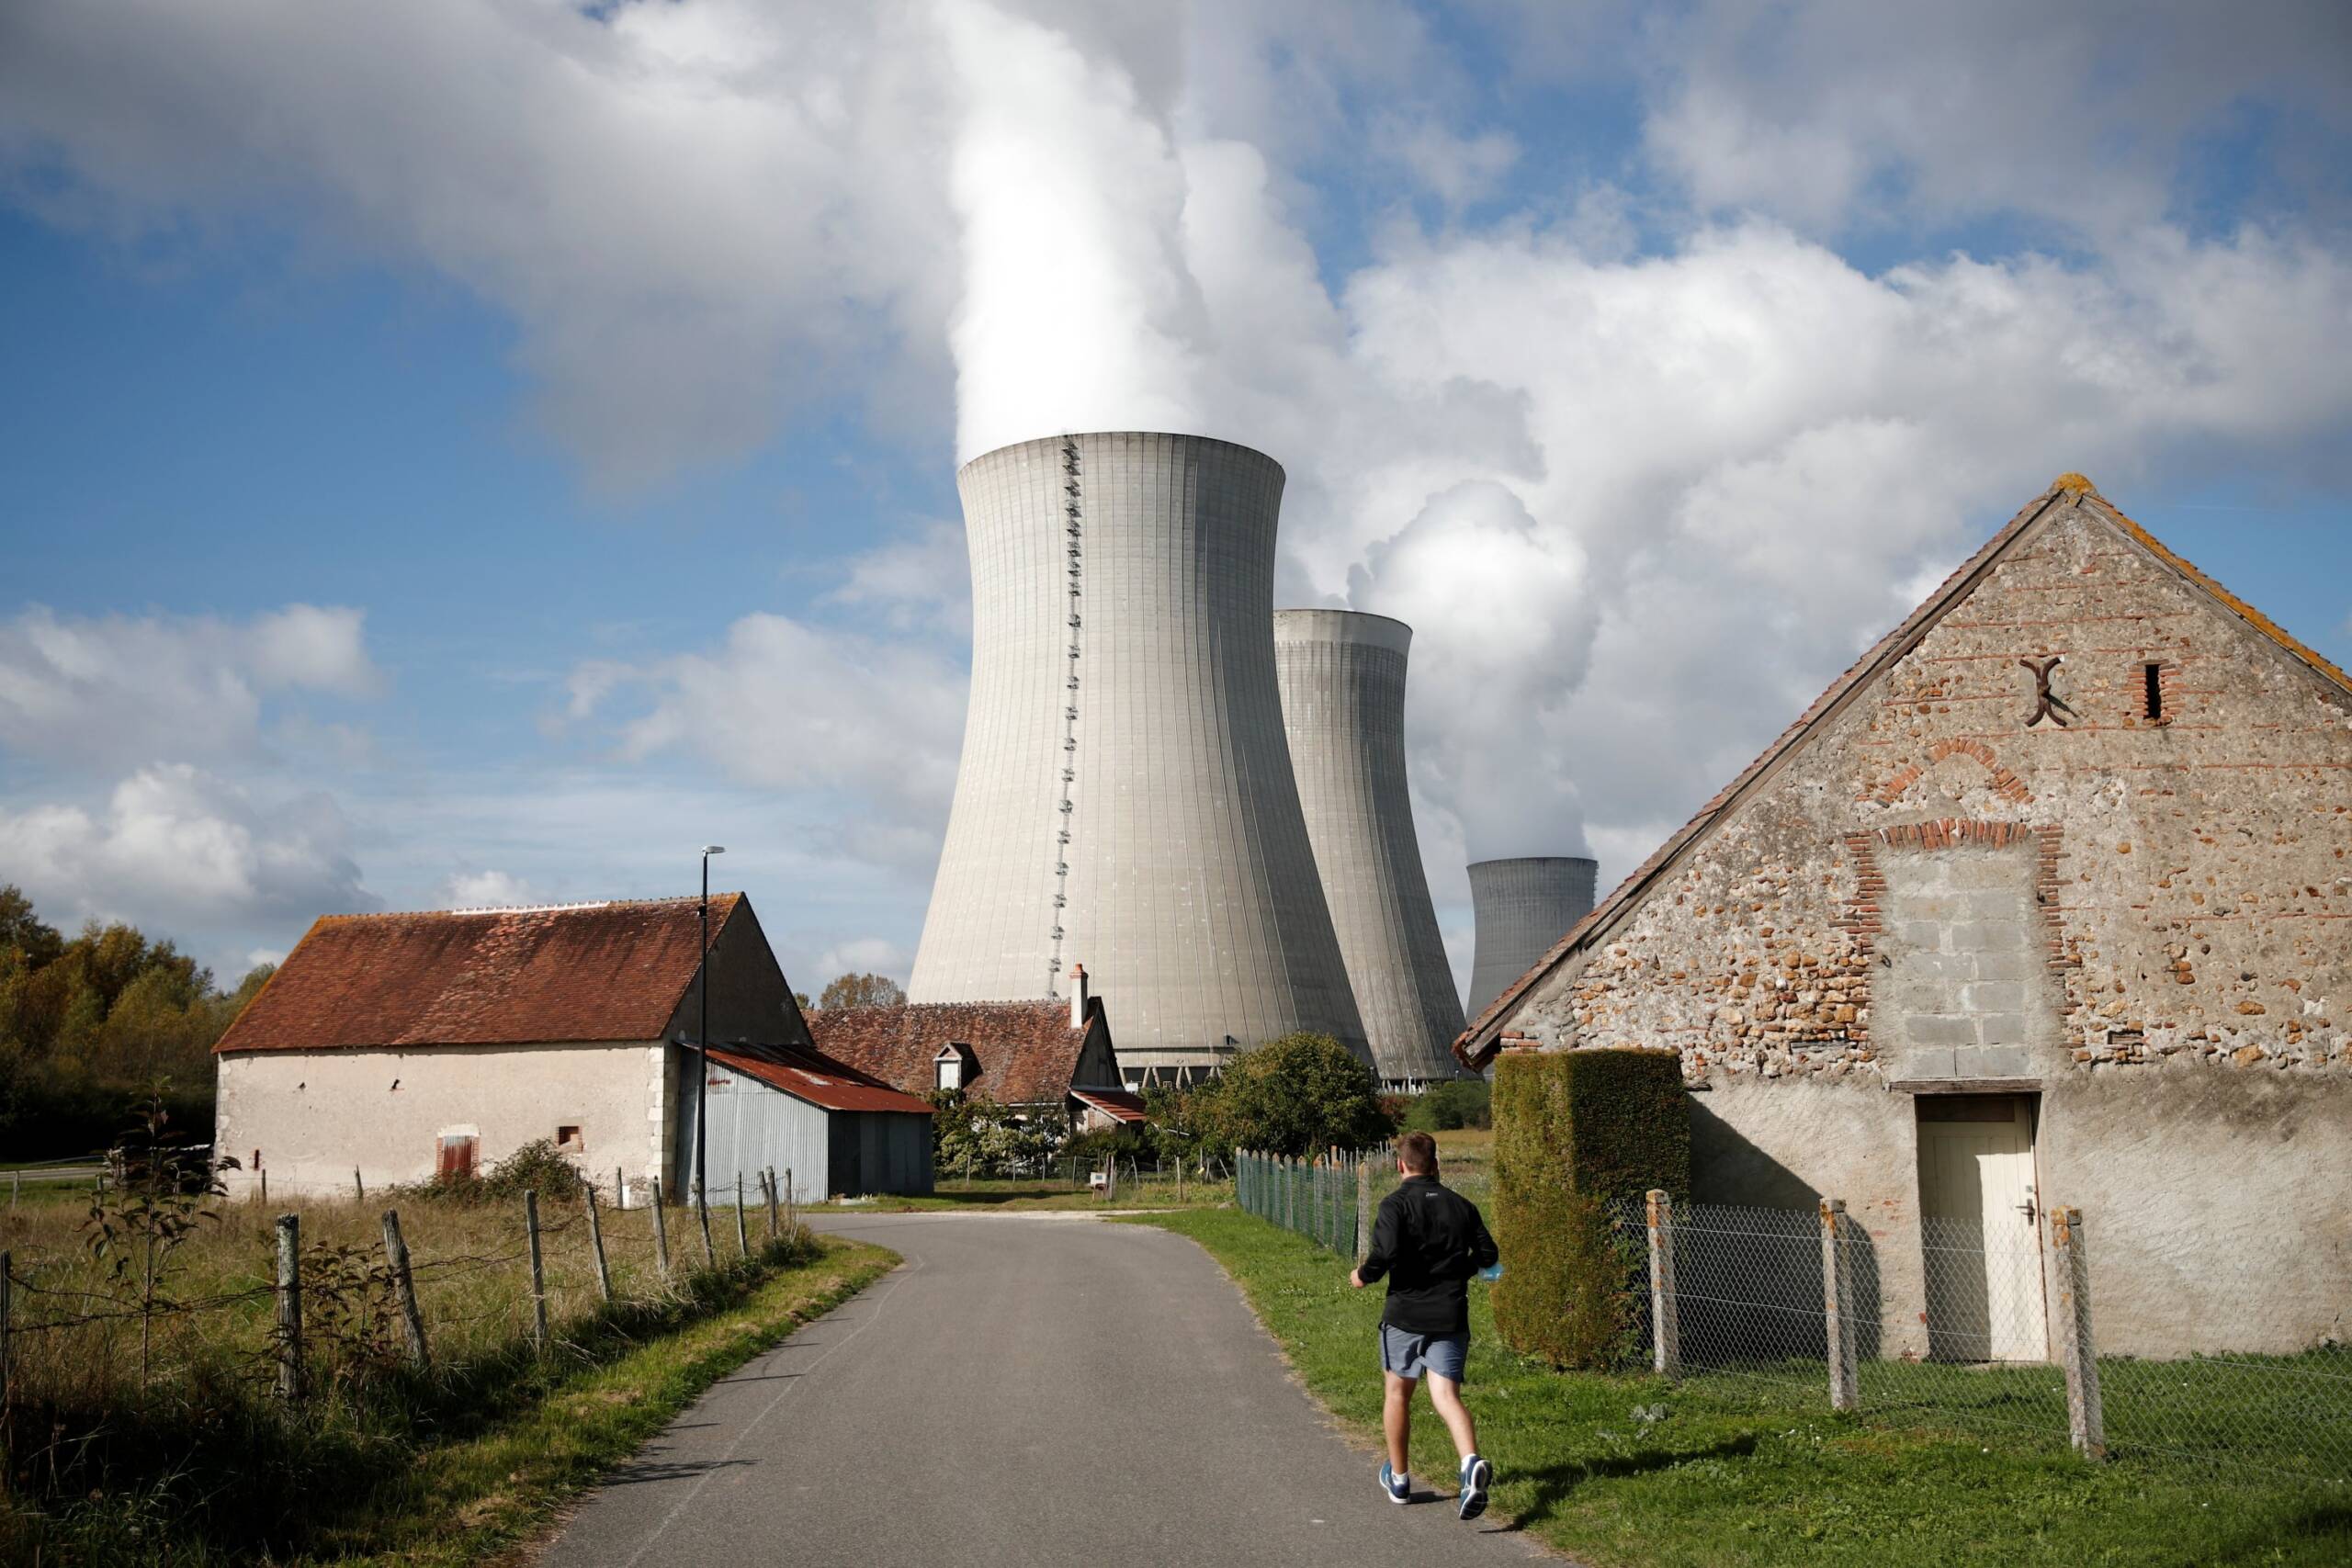 Centrale nucleare francese